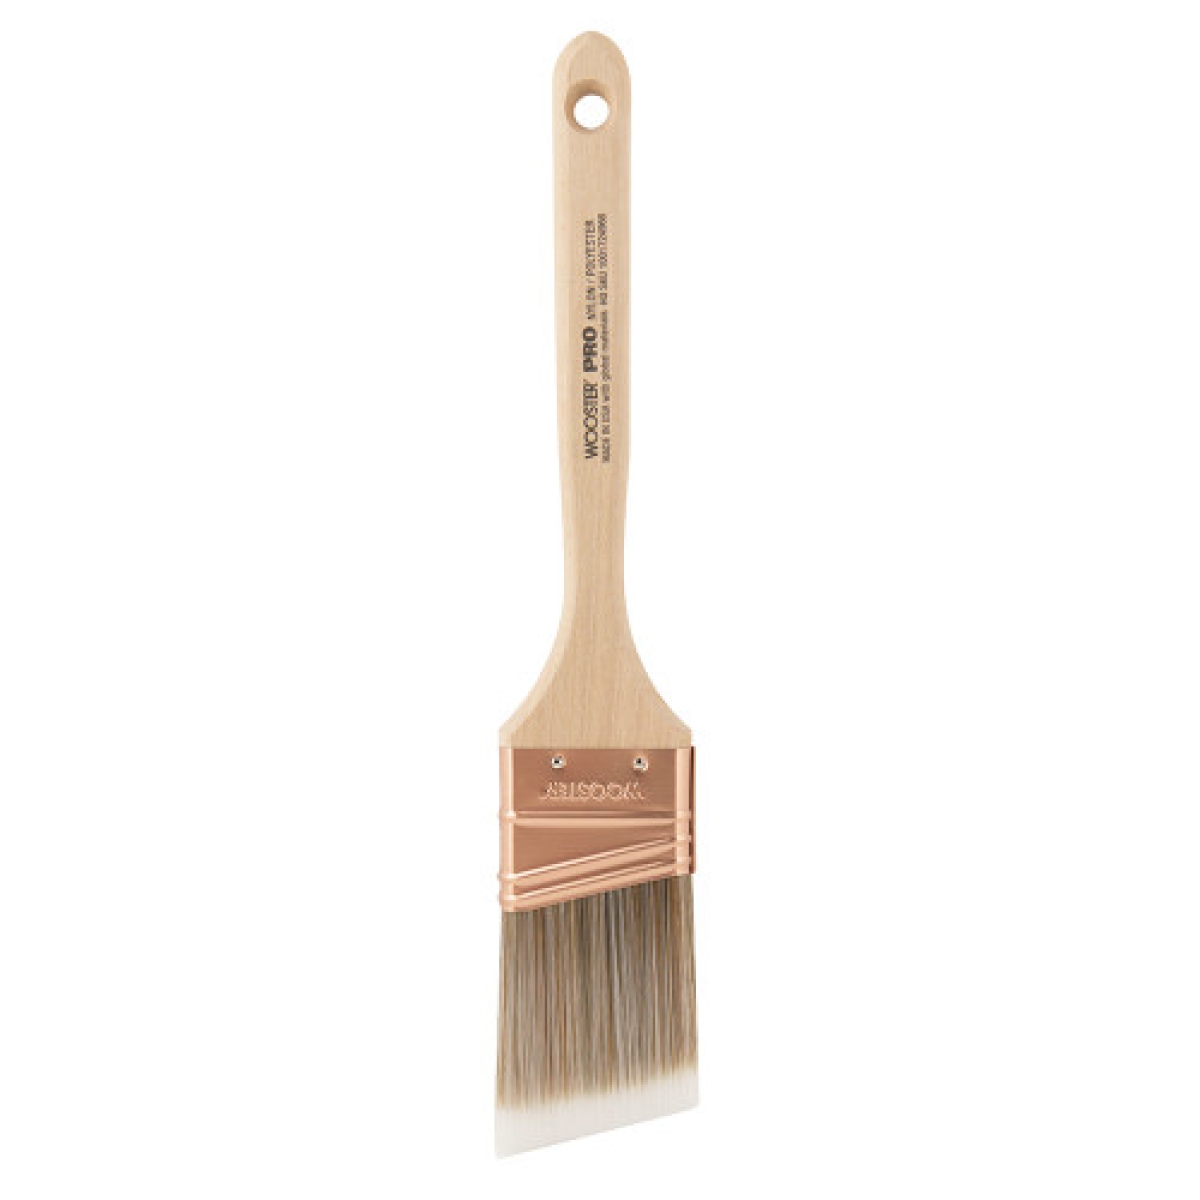 Wooster Silver Tip Angle Sash Paint Brush